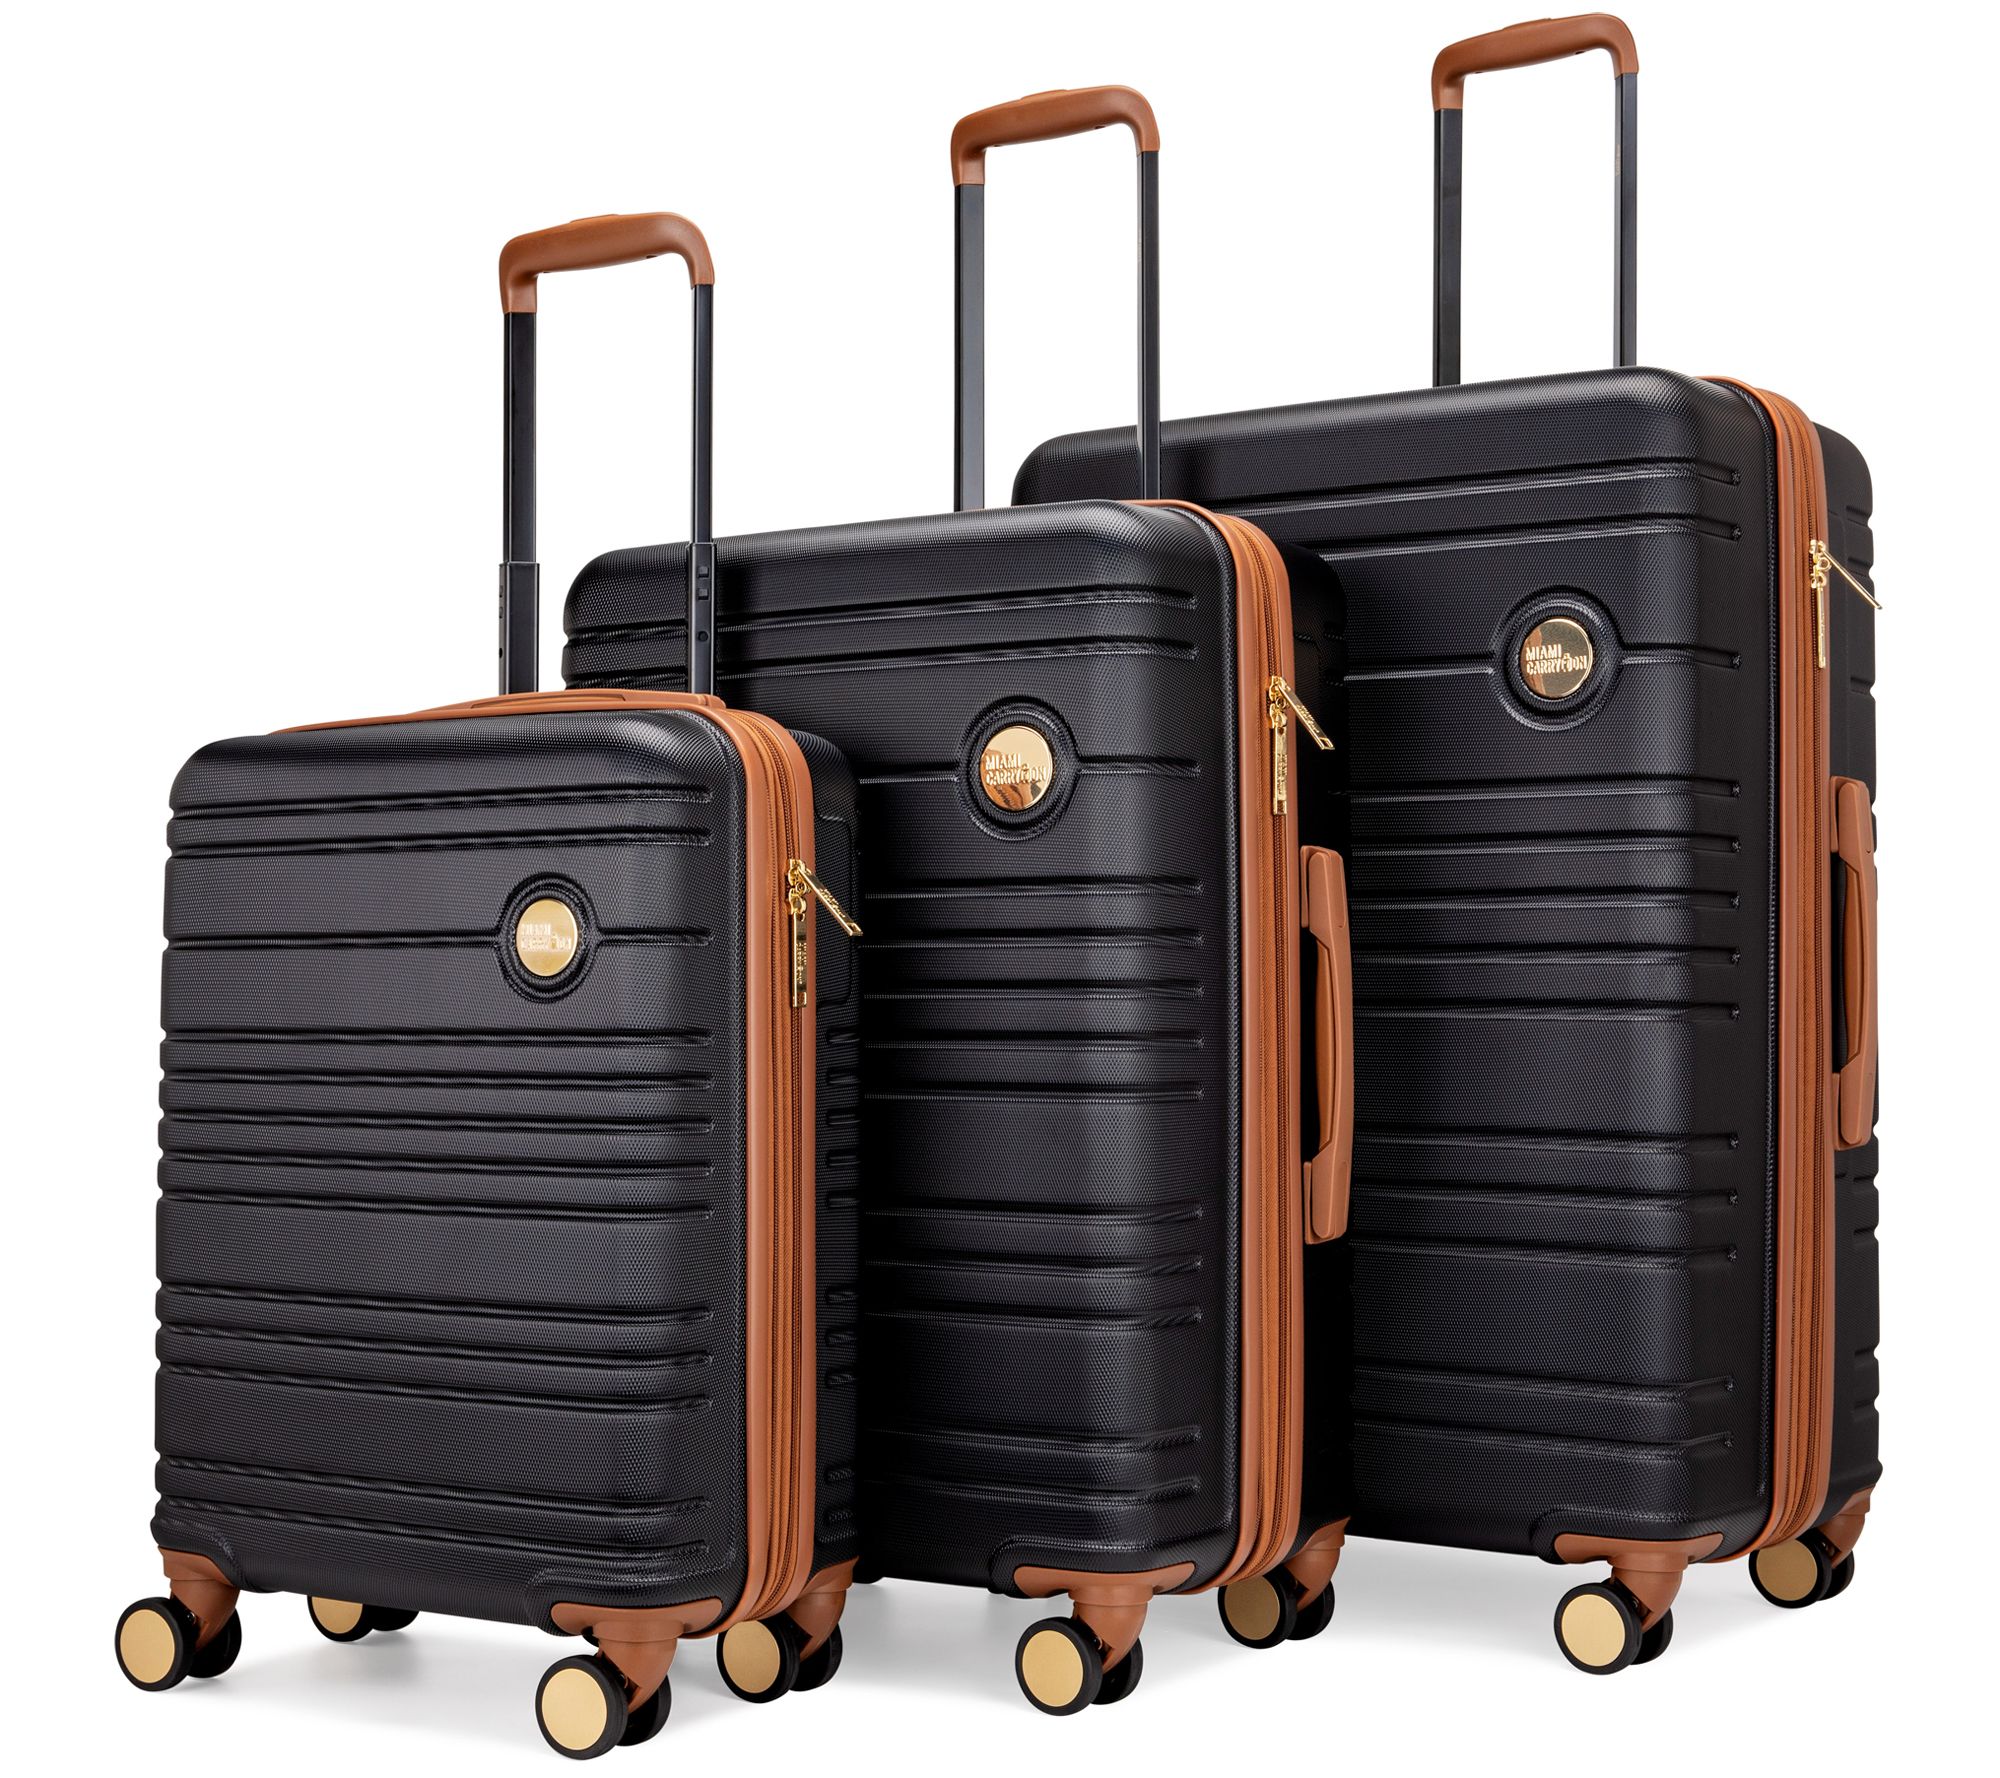 Timberland 3 Piece Hardside Spinner Luggage Suitcase Set in Black